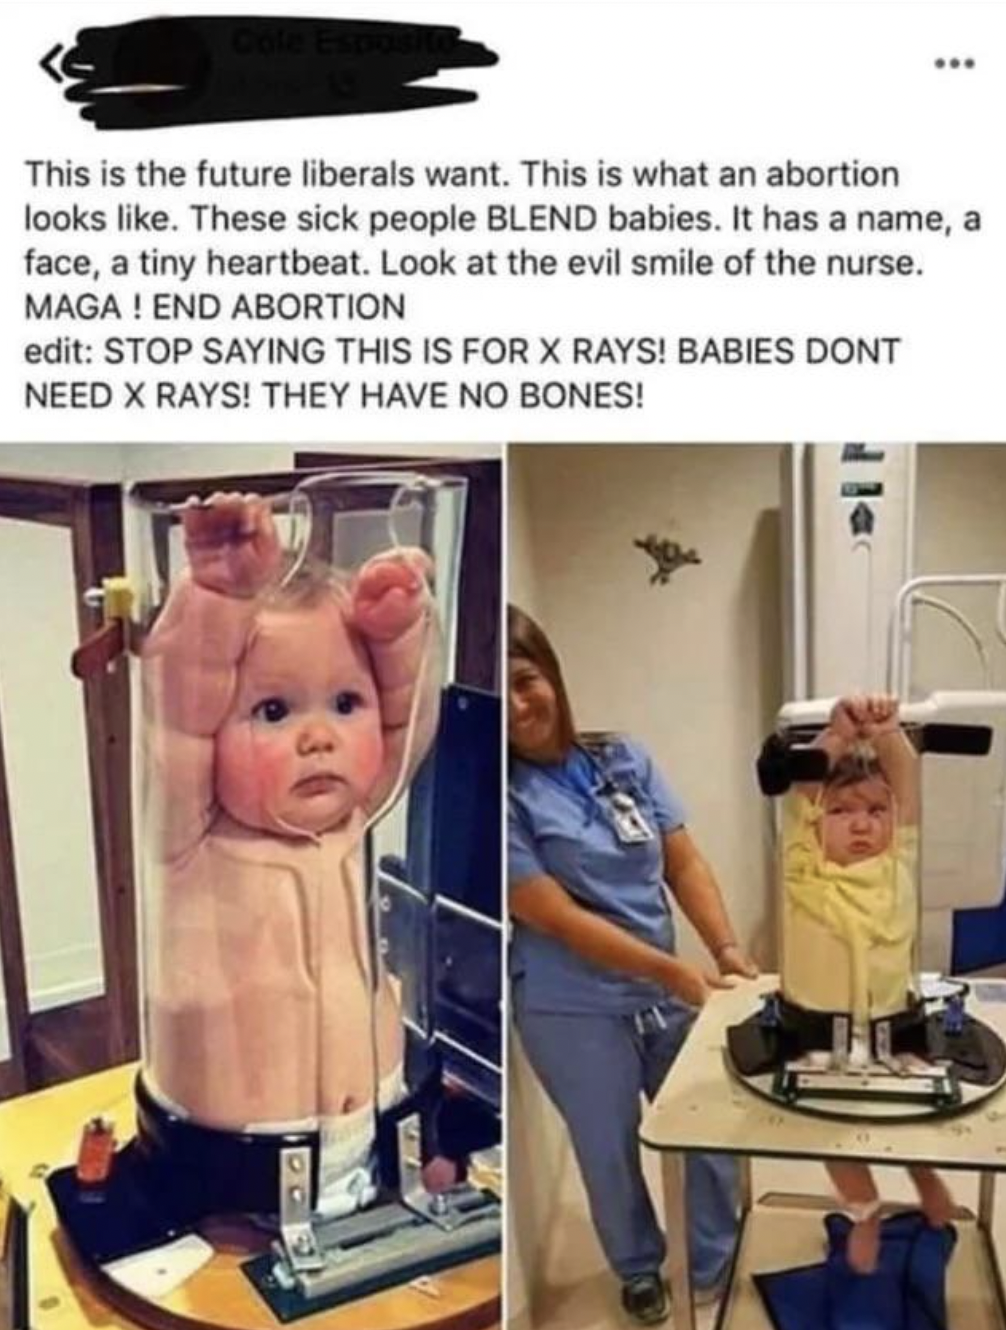 Foolish Facepalms - baby blender meme - This is the future liberals want. This is what an abortion looks . These sick people Blend babies. It has a name, a face, a tiny heartbeat. Look at the evil smile of the nurse. Maga! End Abortion edit Stop Saying Th